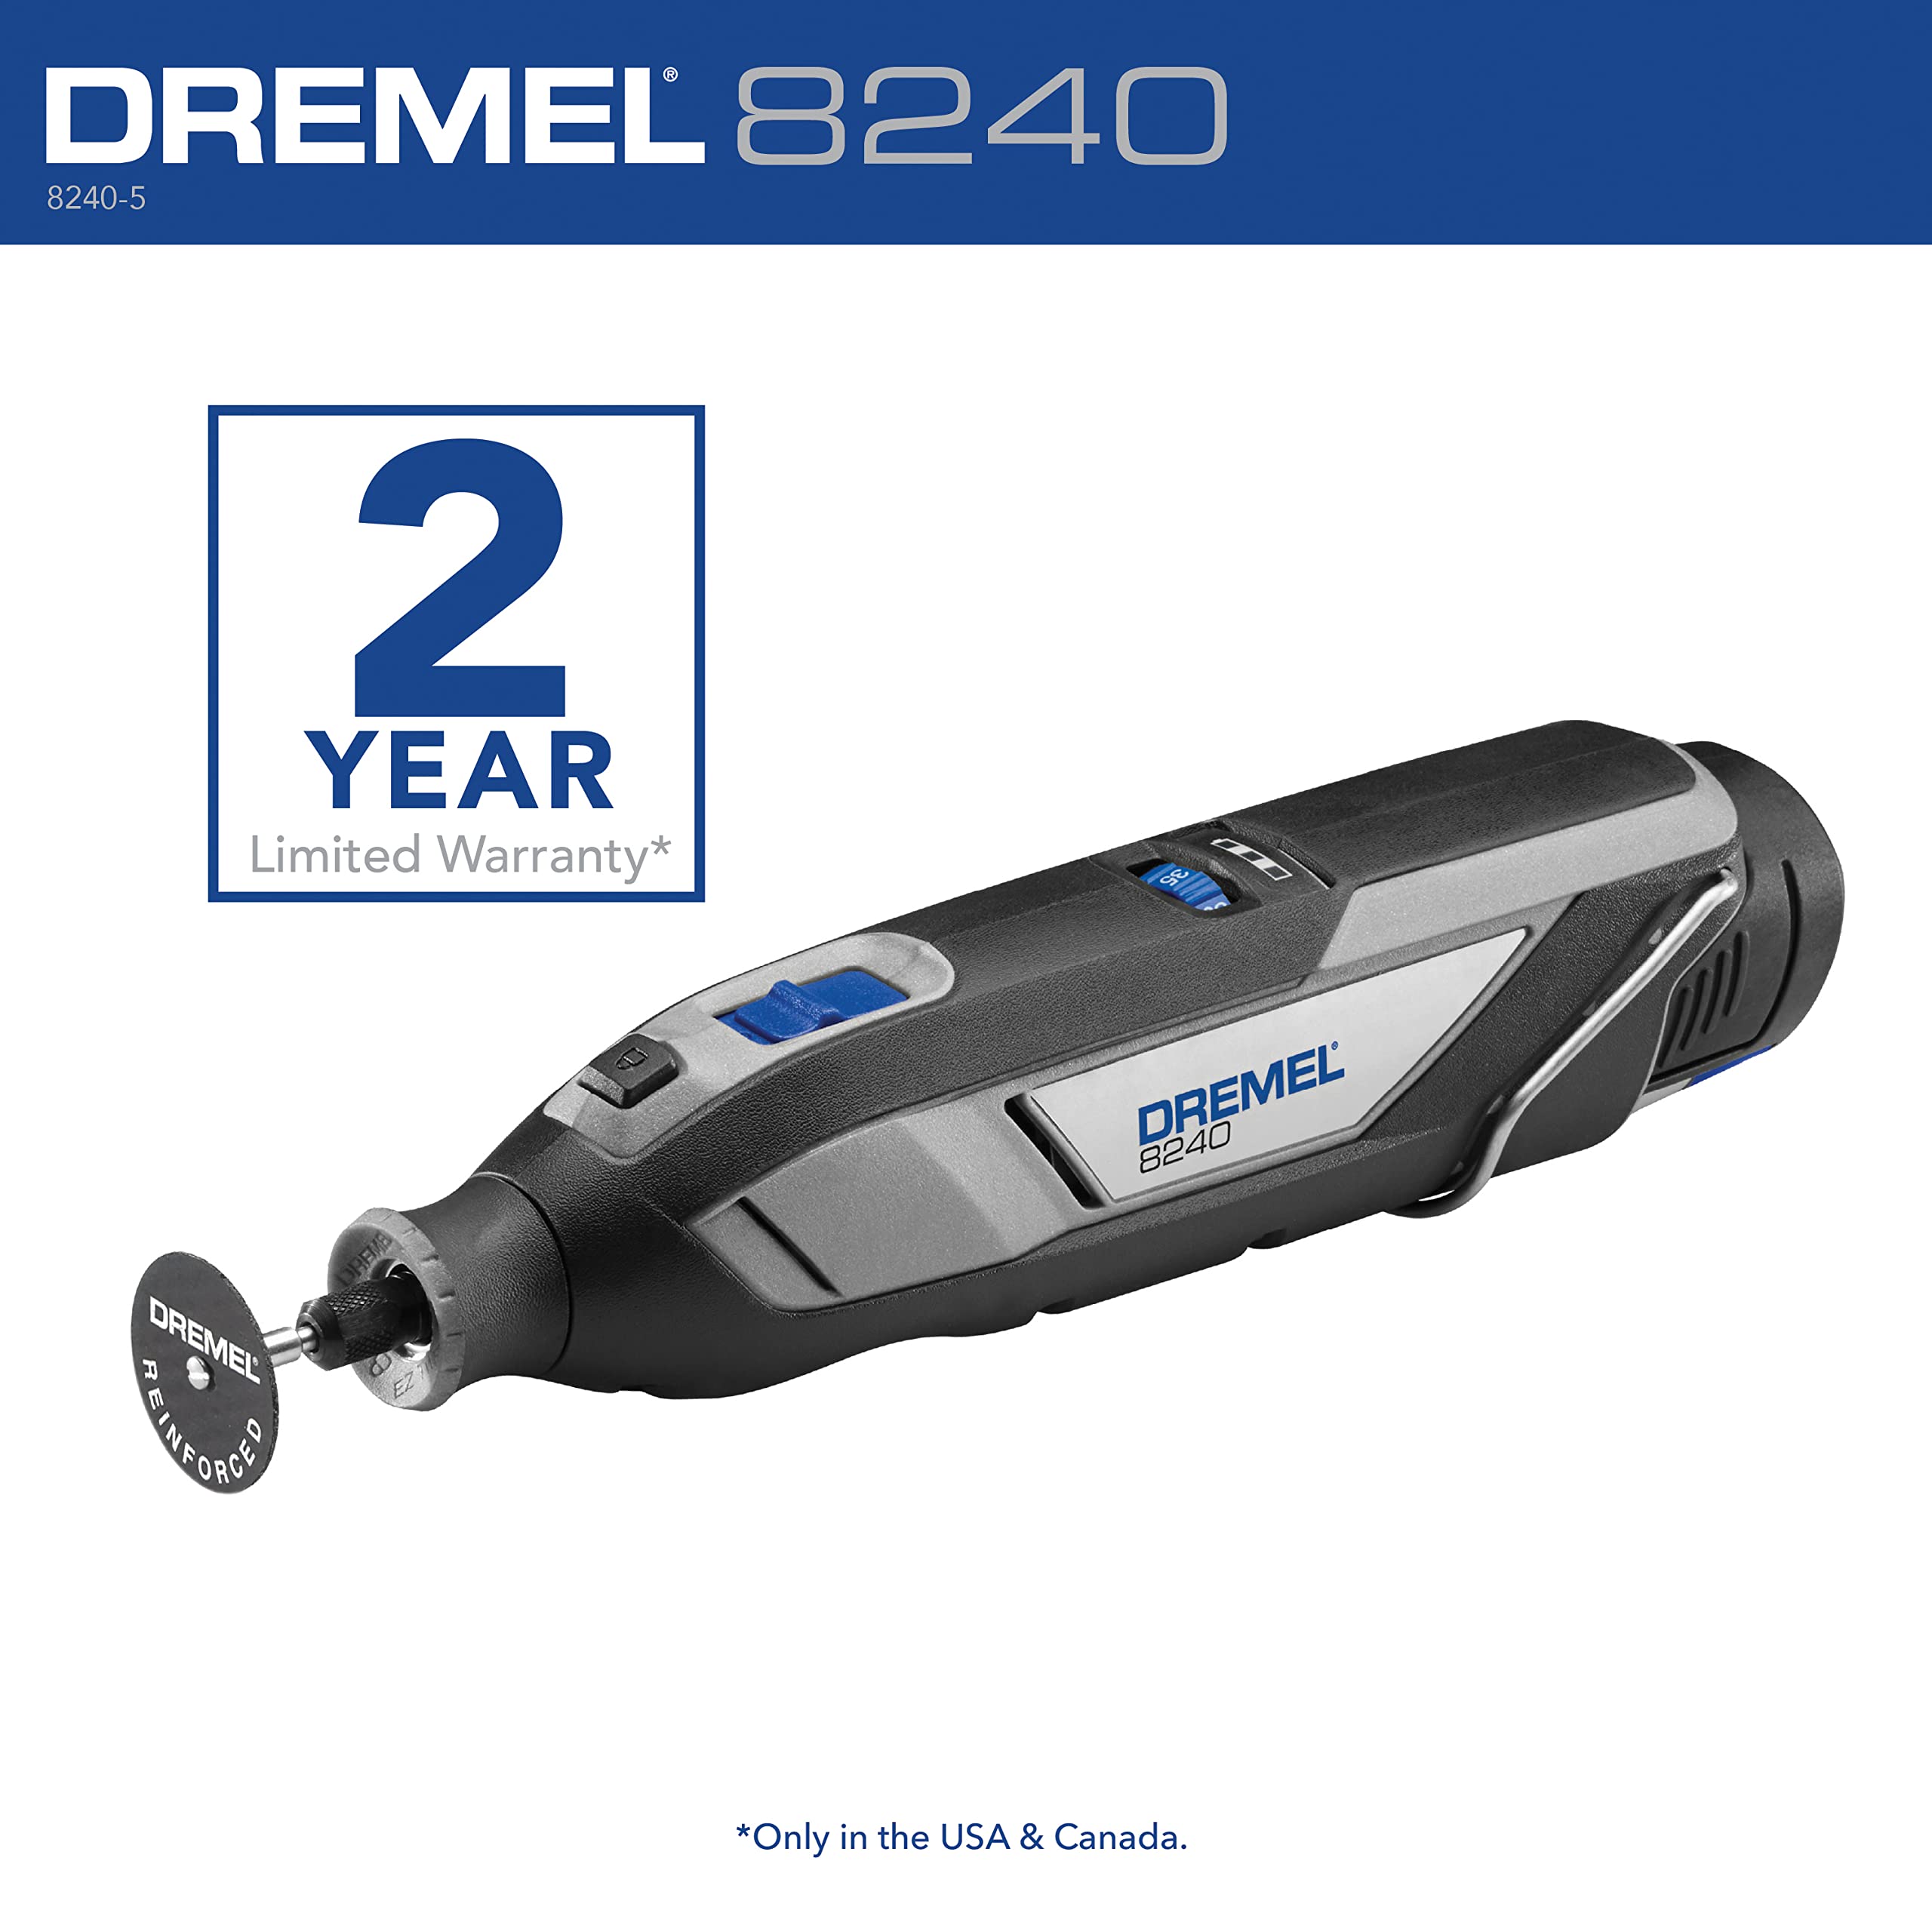 Dremel 8240 12V Cordless Rotary Tool Kit with Variable Speed and Comfort Grip -Includes 2Ah Battery Pack, Charger & More (Renewed)